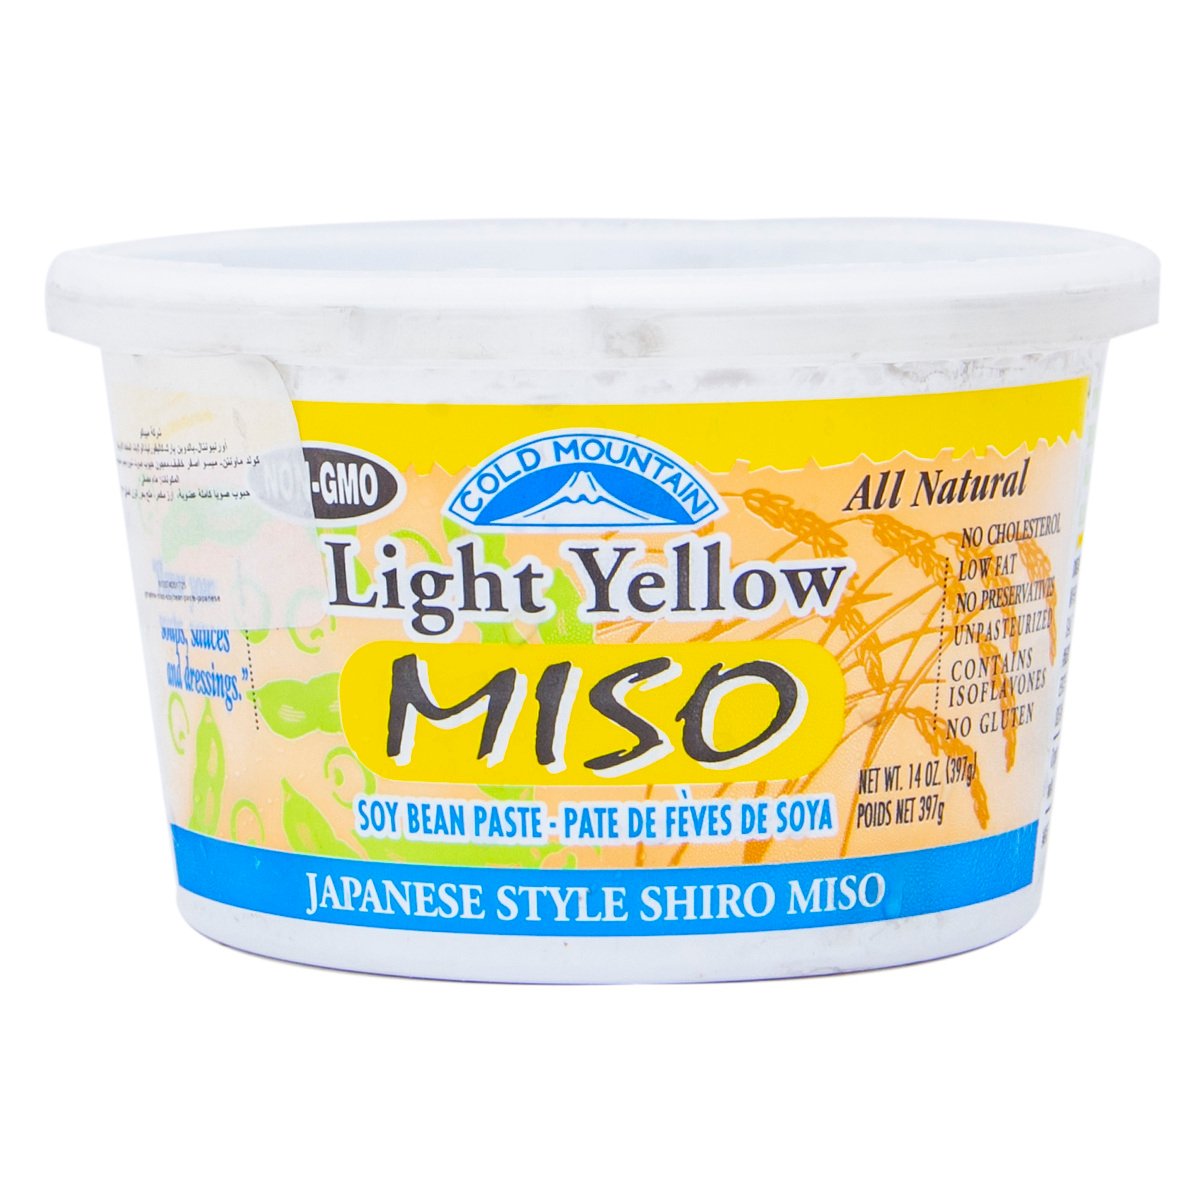 Cold Mountain Miso Light Yellow 397 g